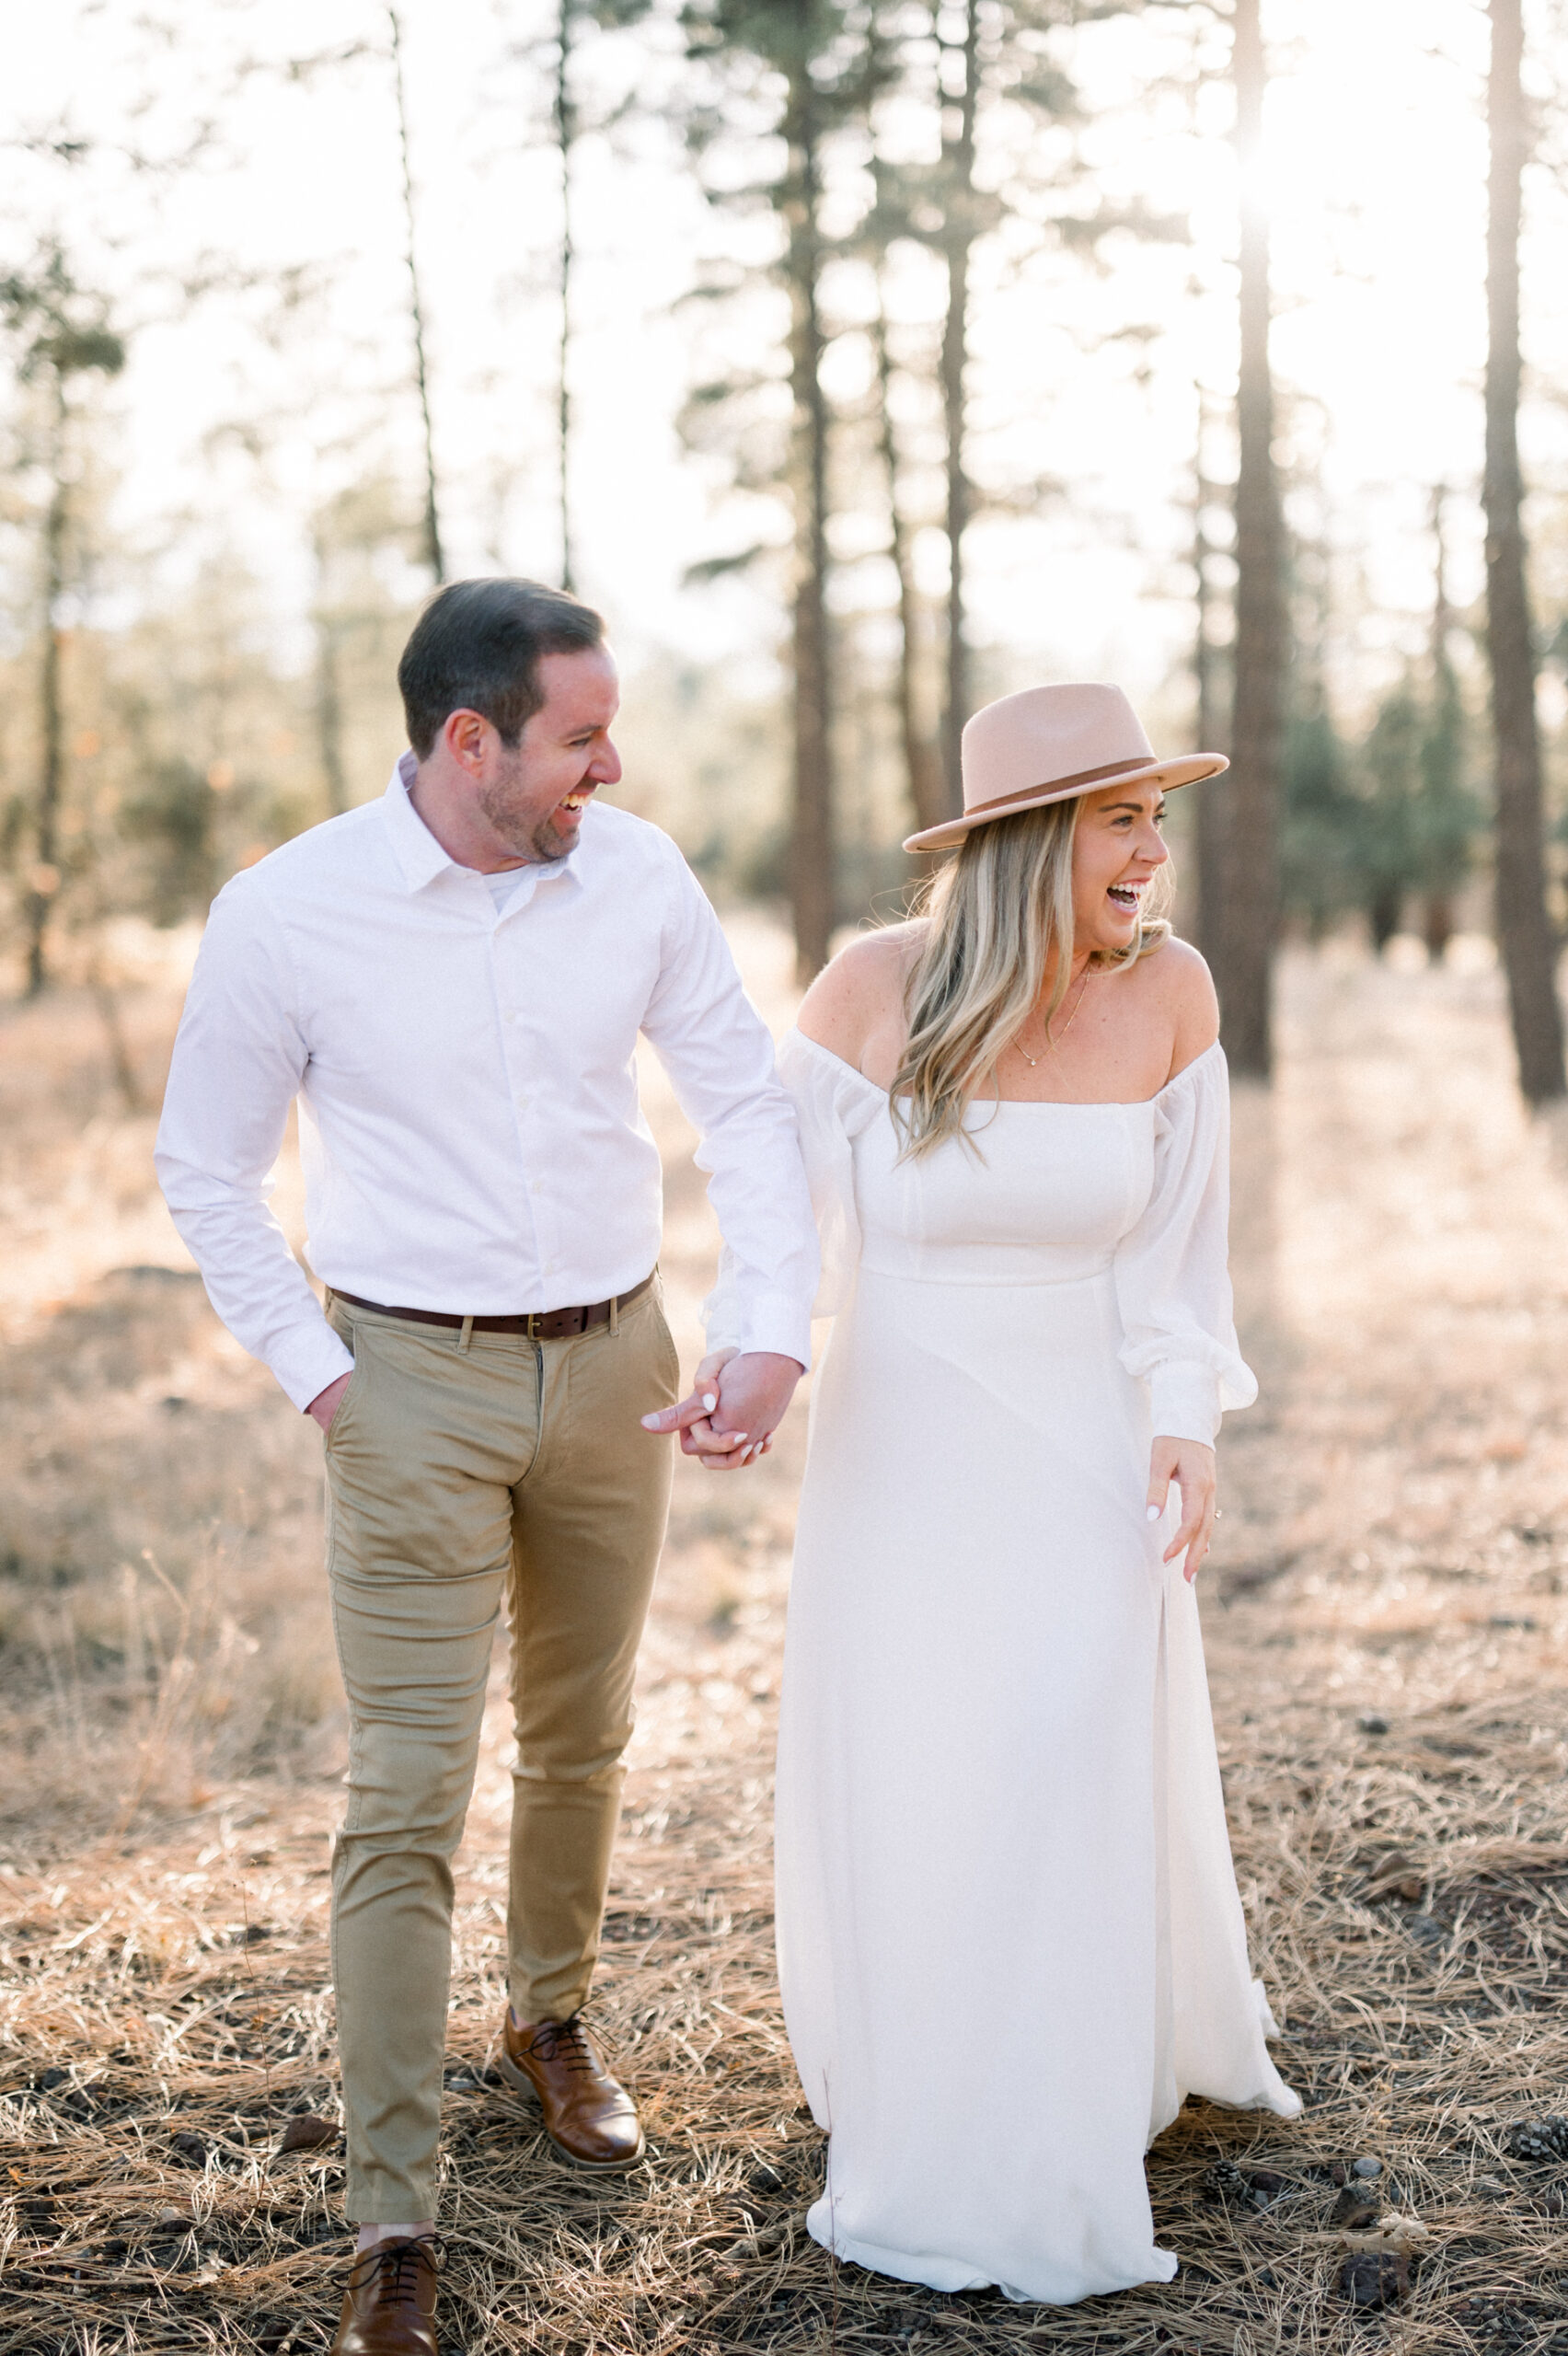 Ellen and RJ's Fall Flagstaff Engagement Session was both fun and full of love. I can't wait for them to be getting married at the Royal Palms this fall!